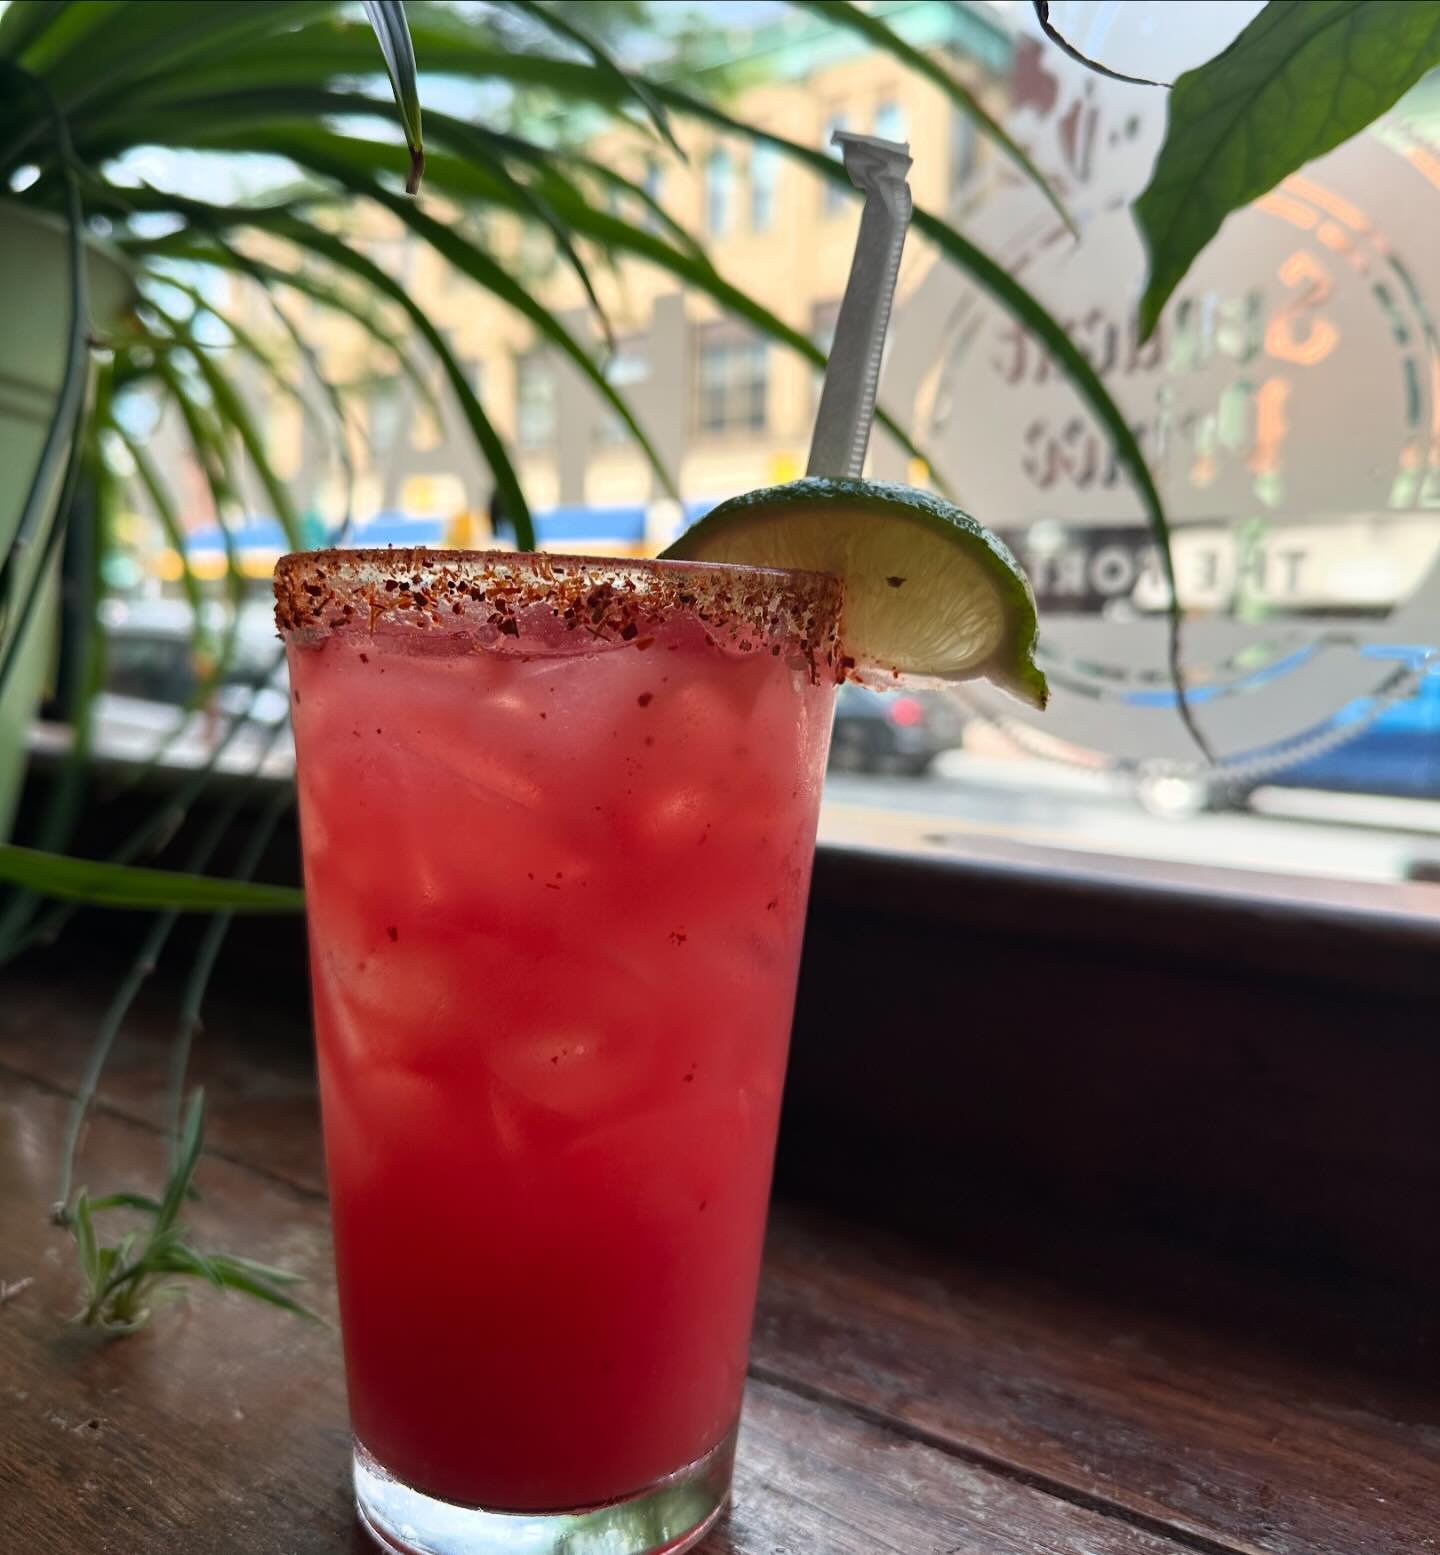 Happy Friday! It&rsquo;s a beautiful day to kick your weekend off with our Watermelon Margarita 🍉 Haus made Watermelon Pur&eacute;e &amp; Haus made fresh pressed Sour come together with Tequila &amp; Triple Sec to make this the perfect weekend cockt